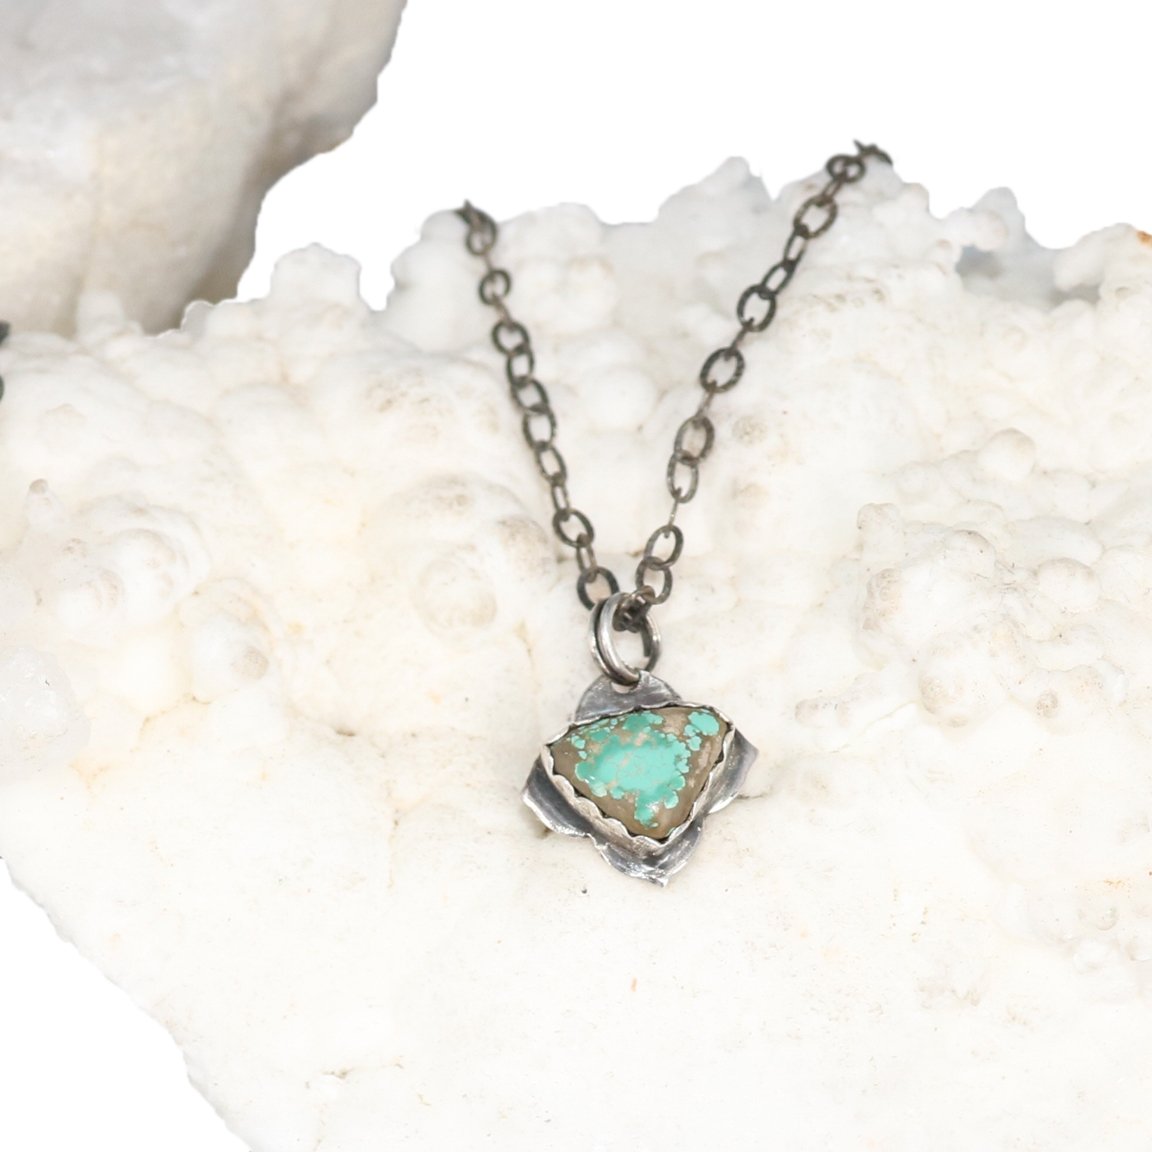 Carico Lake Turquoise Pendant Necklace Sterling Chain 18" -NewWorldGems